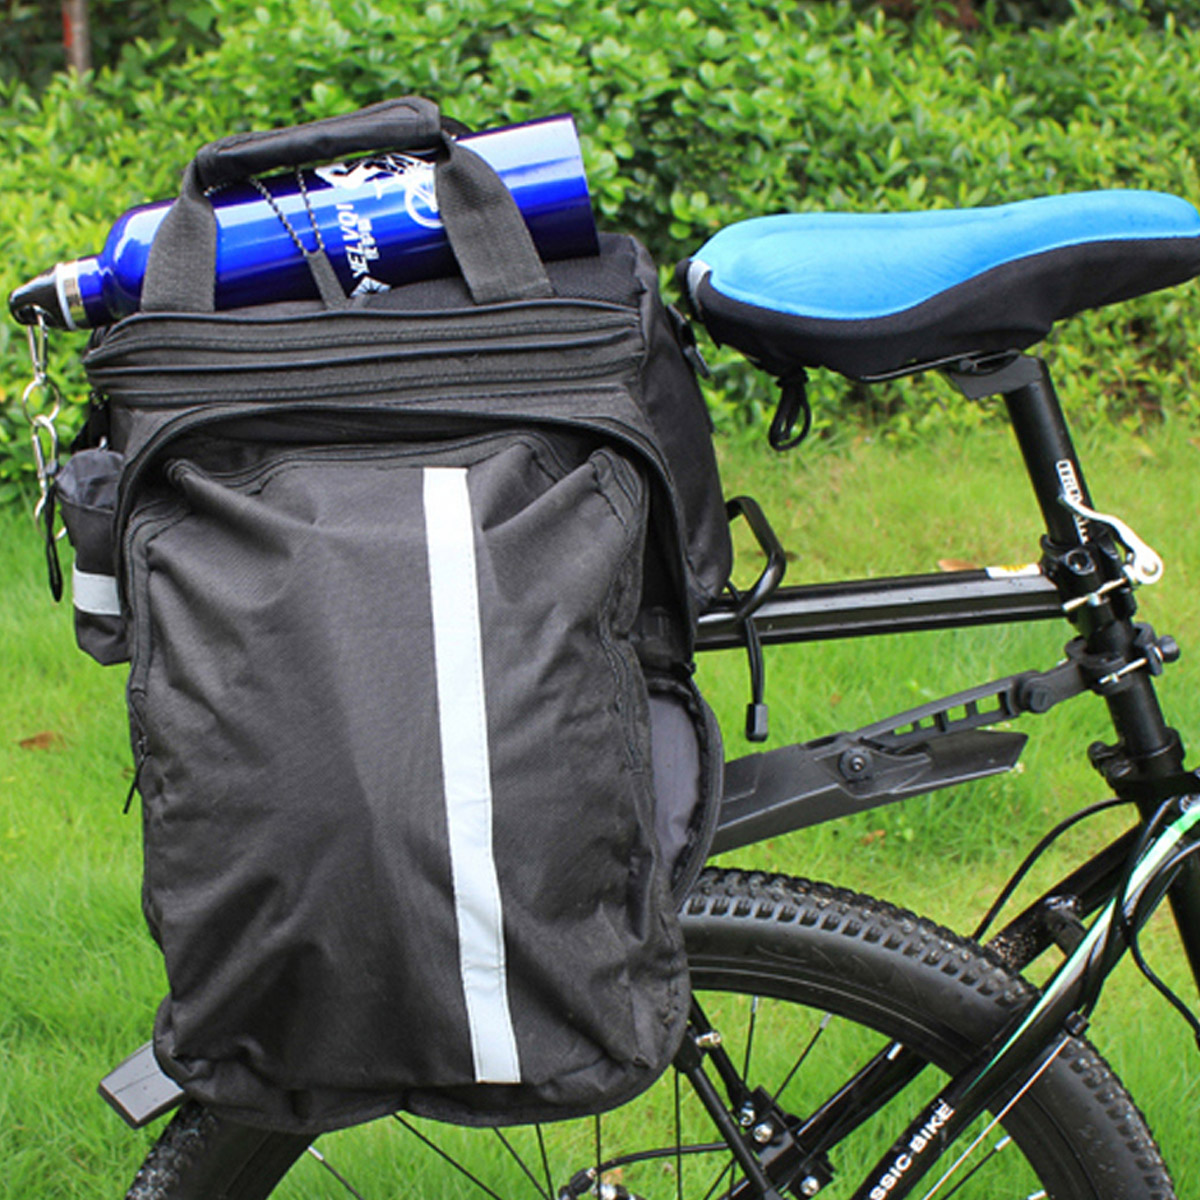 27L-Bicycle-Riding-Package-Large-Capacity-Waterproof-Reflective-Strips-Outdoor-Riding-Bag-1874551-4